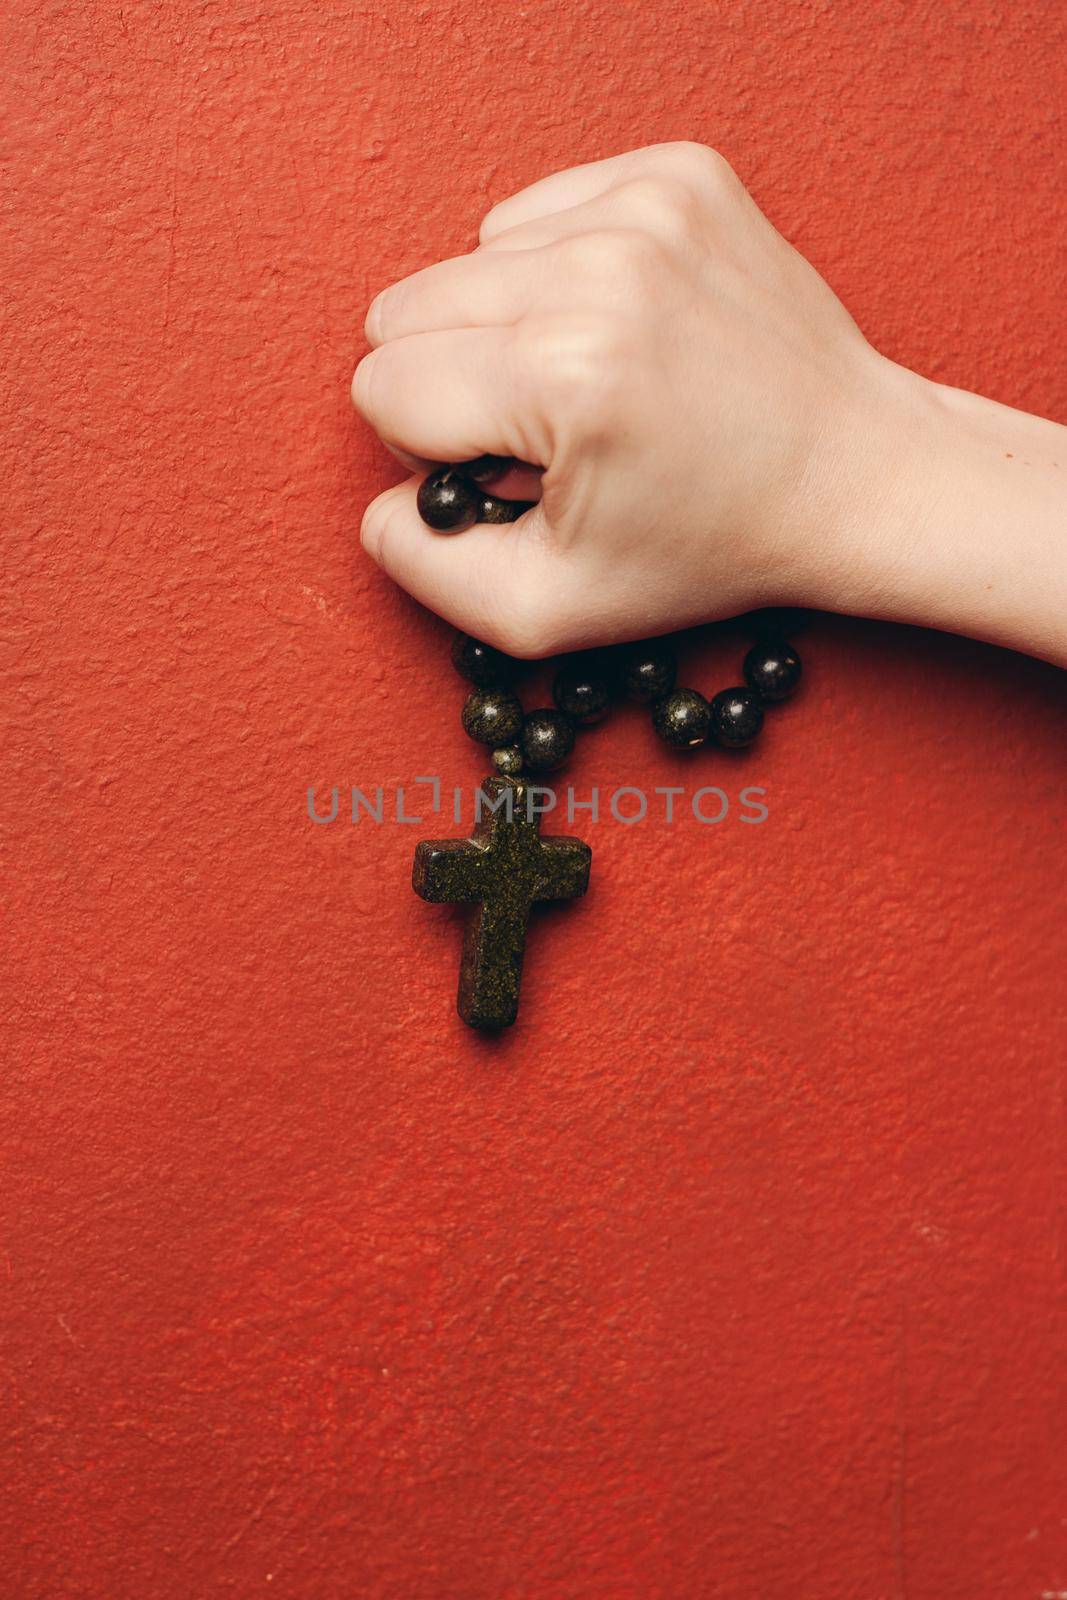 rosary beads with a cross catholicism christianity. High quality photo